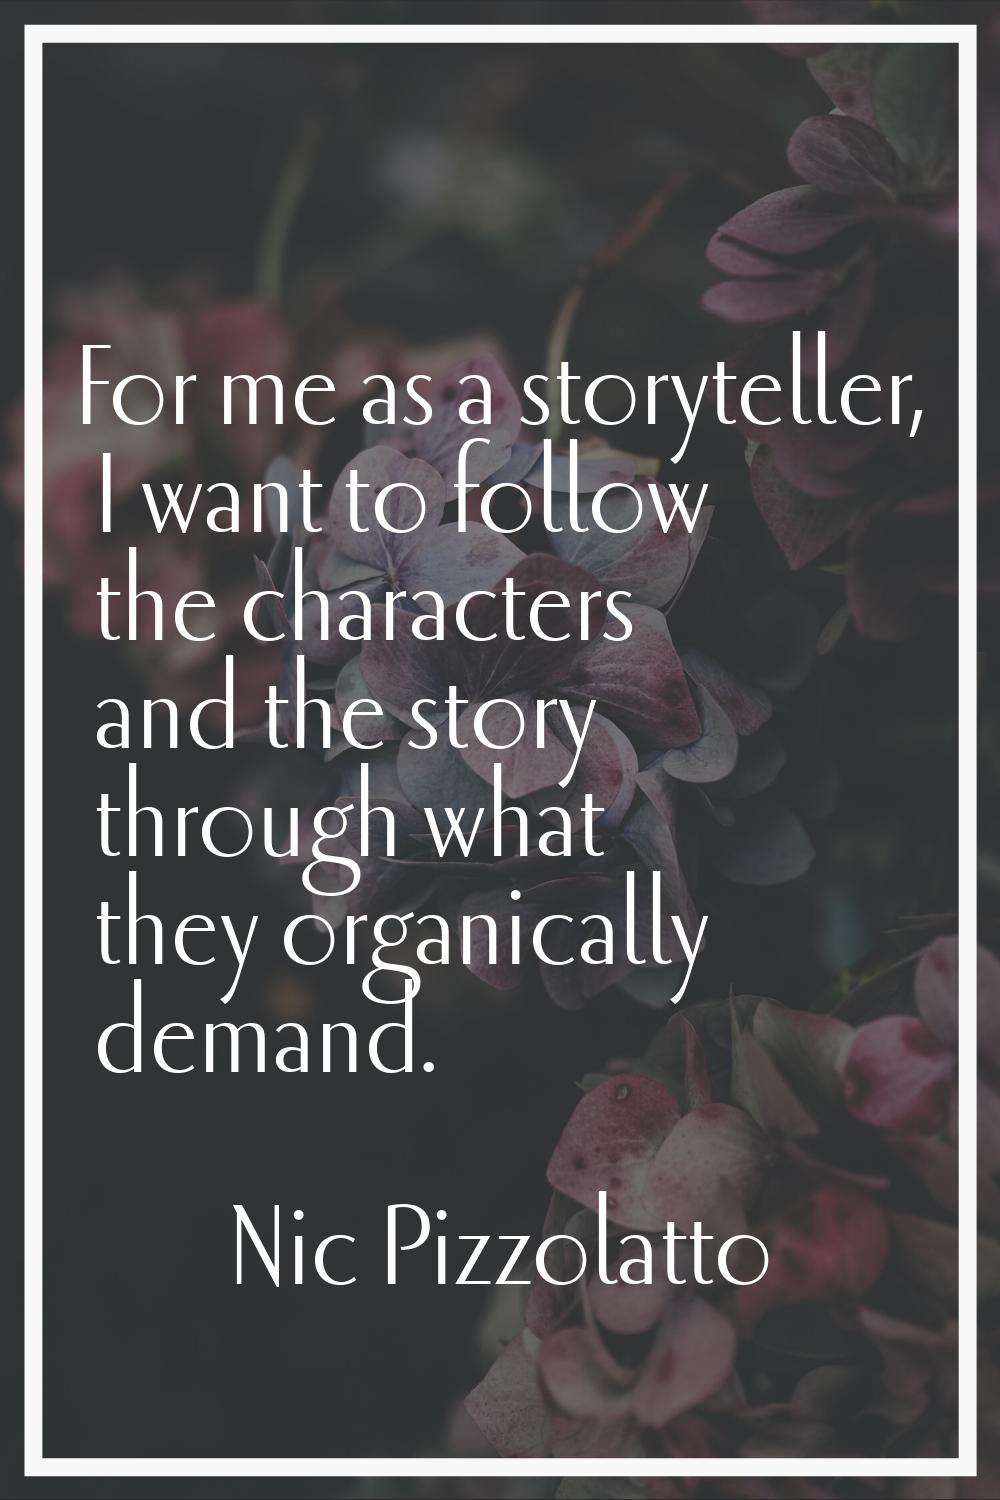 For me as a storyteller, I want to follow the characters and the story through what they organicall